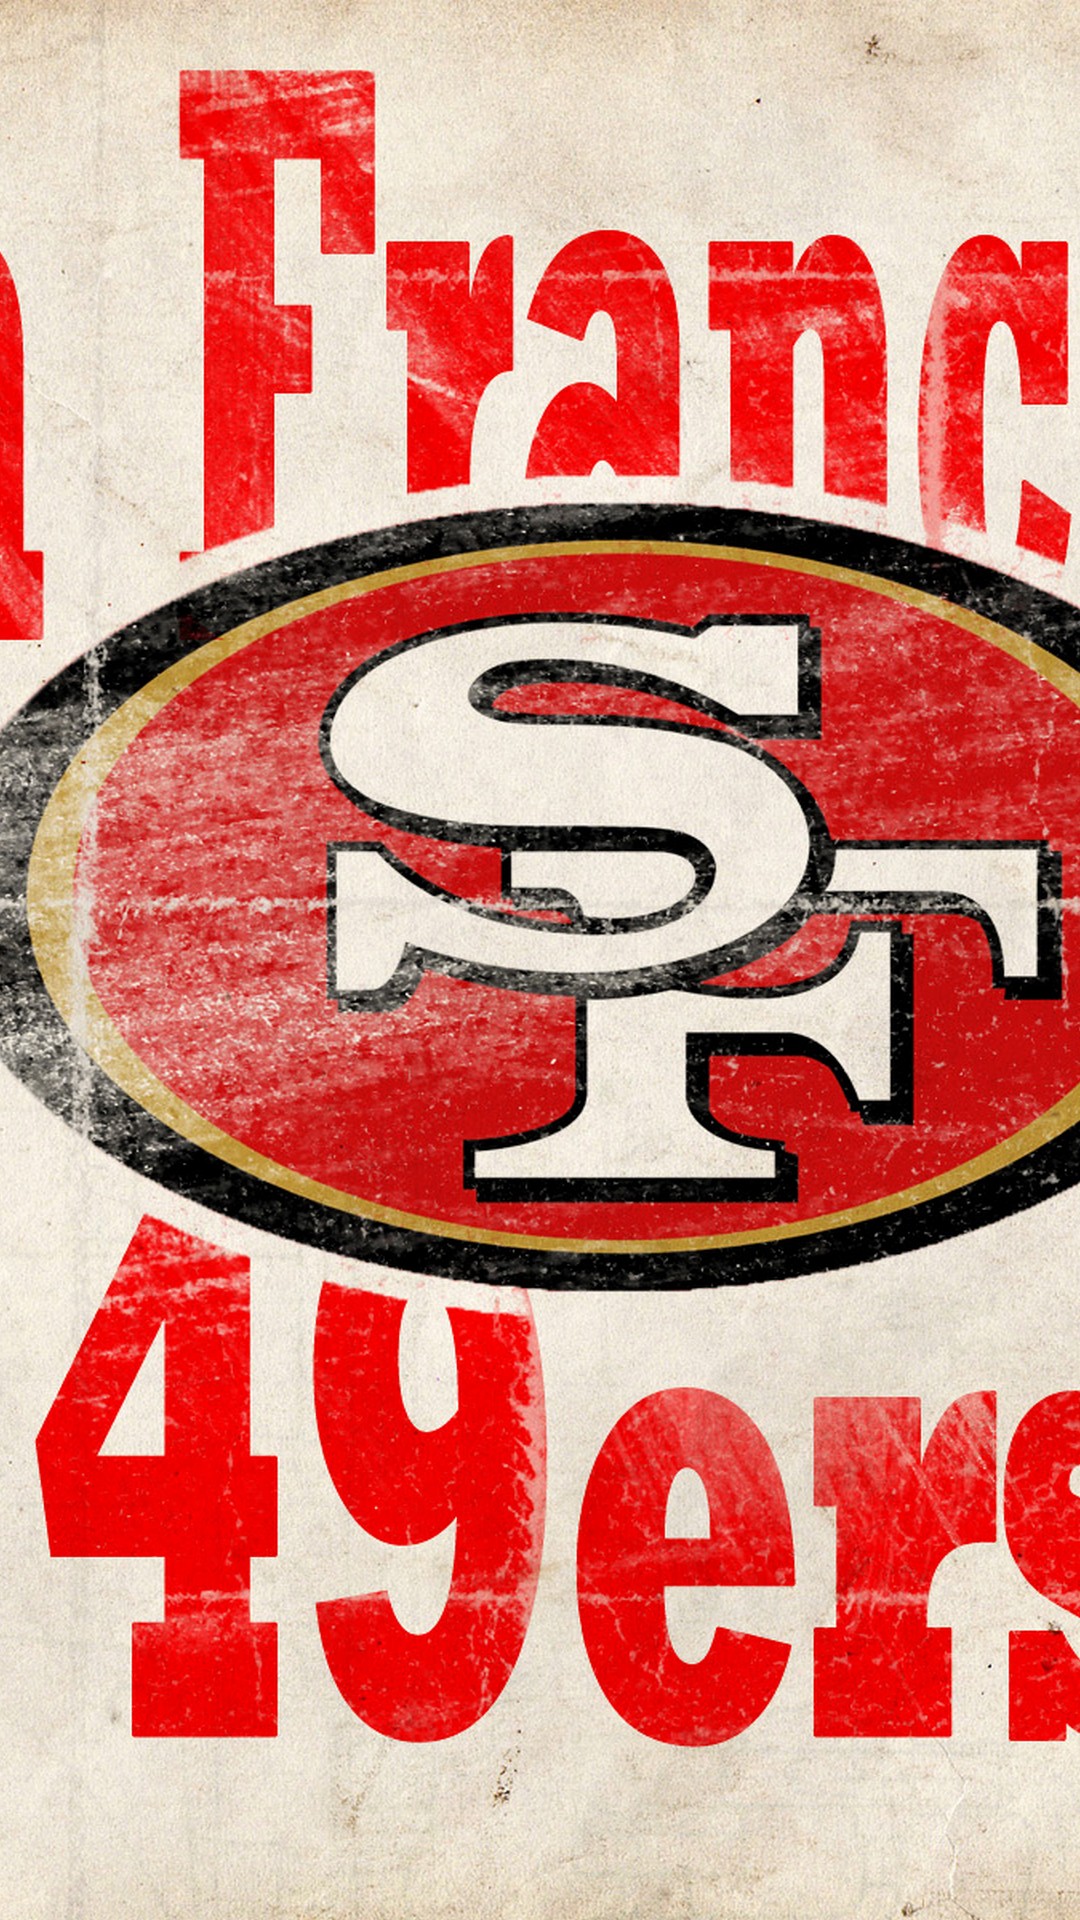 San Francisco 49ers iPhone Wallpaper Home Screen with high-resolution 1080x1920 pixel. Download and set as wallpaper for Desktop Computer, Apple iPhone X, XS Max, XR, 8, 7, 6, SE, iPad, Android